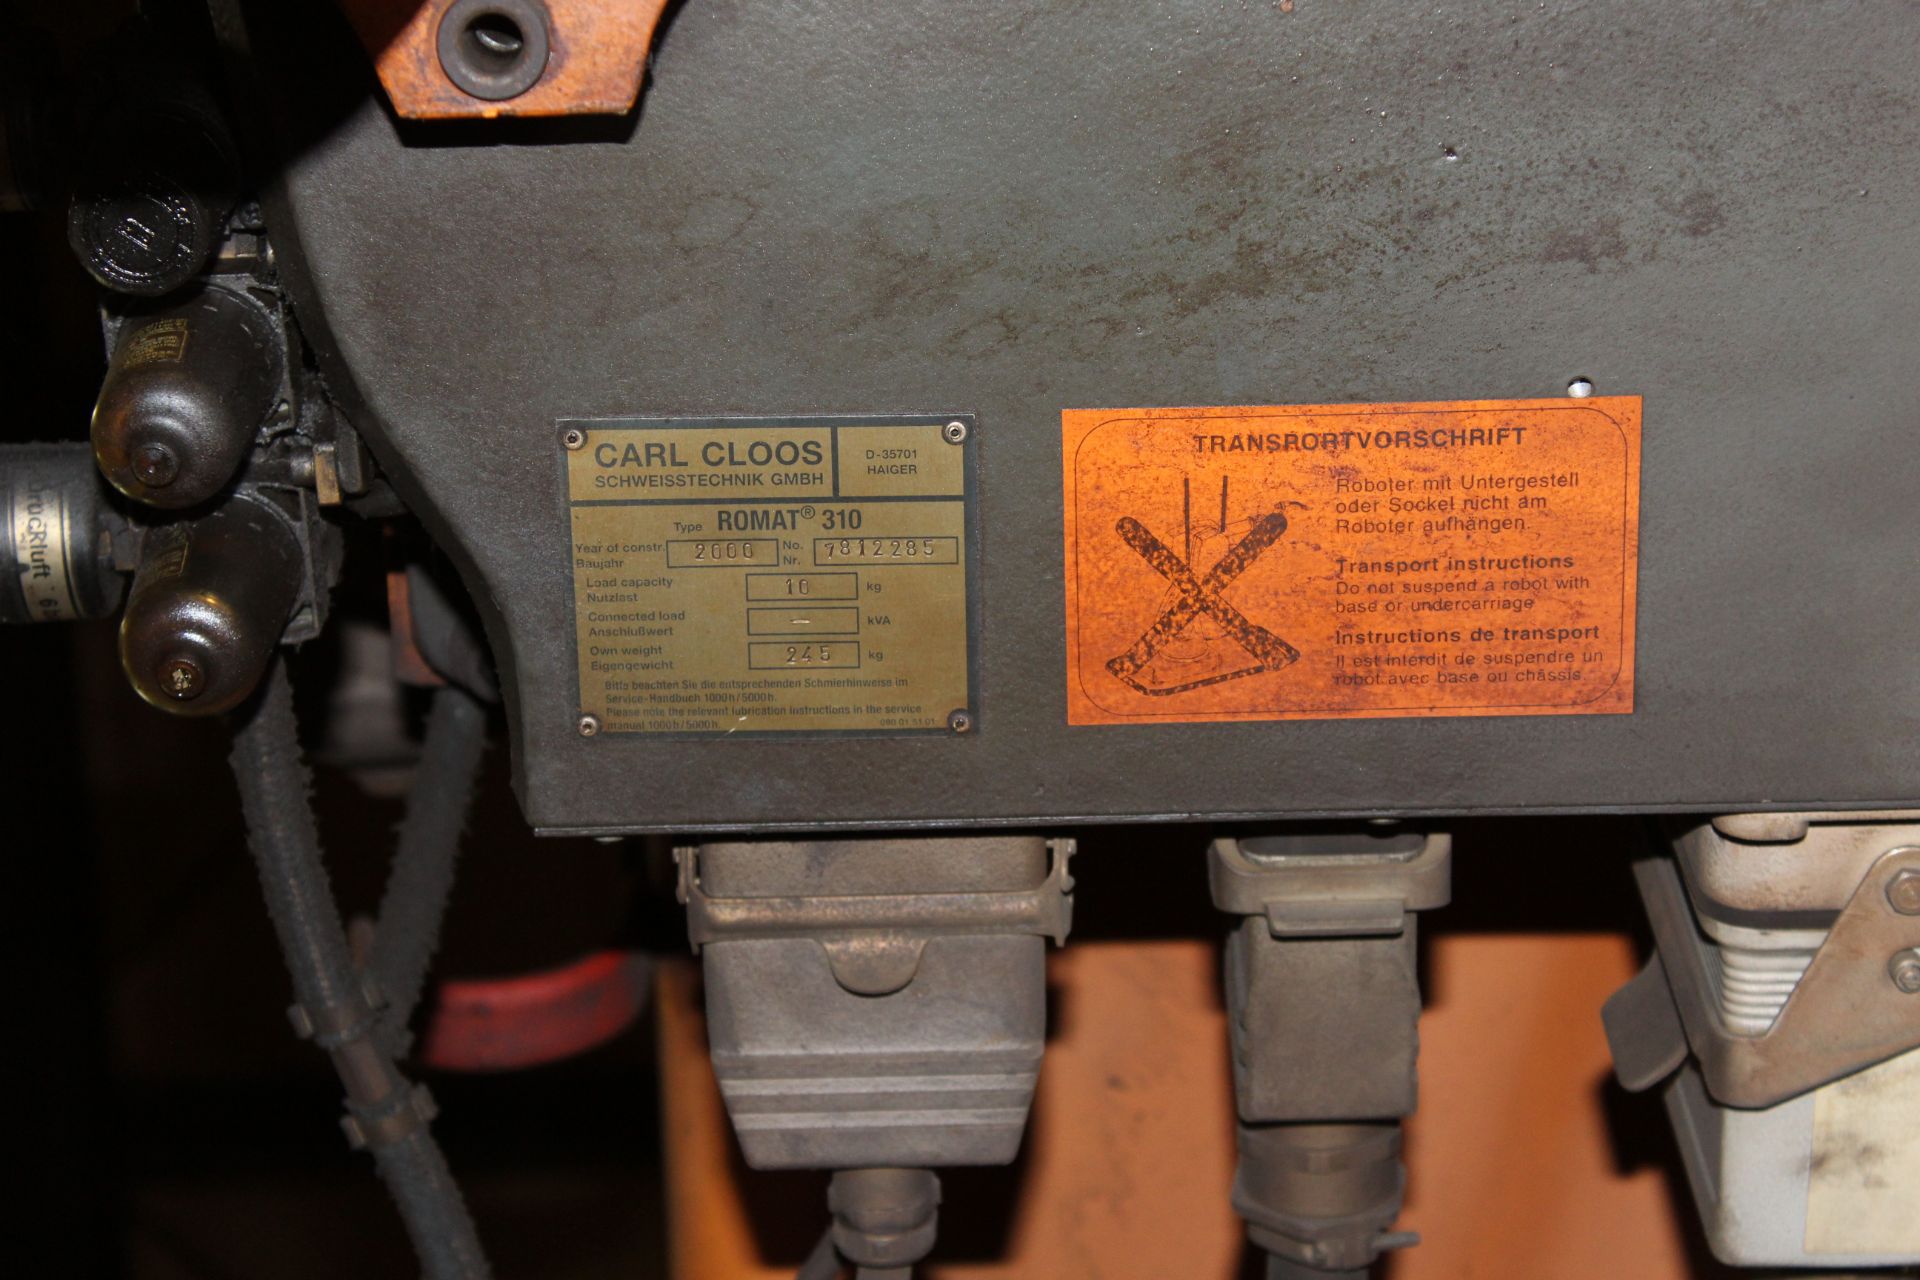 CLOOS ROMAT 310 ROBOTIC WELDING CELL NEW 2000 WITH SAFETY SENSORS S/N 7812285 - Image 14 of 14